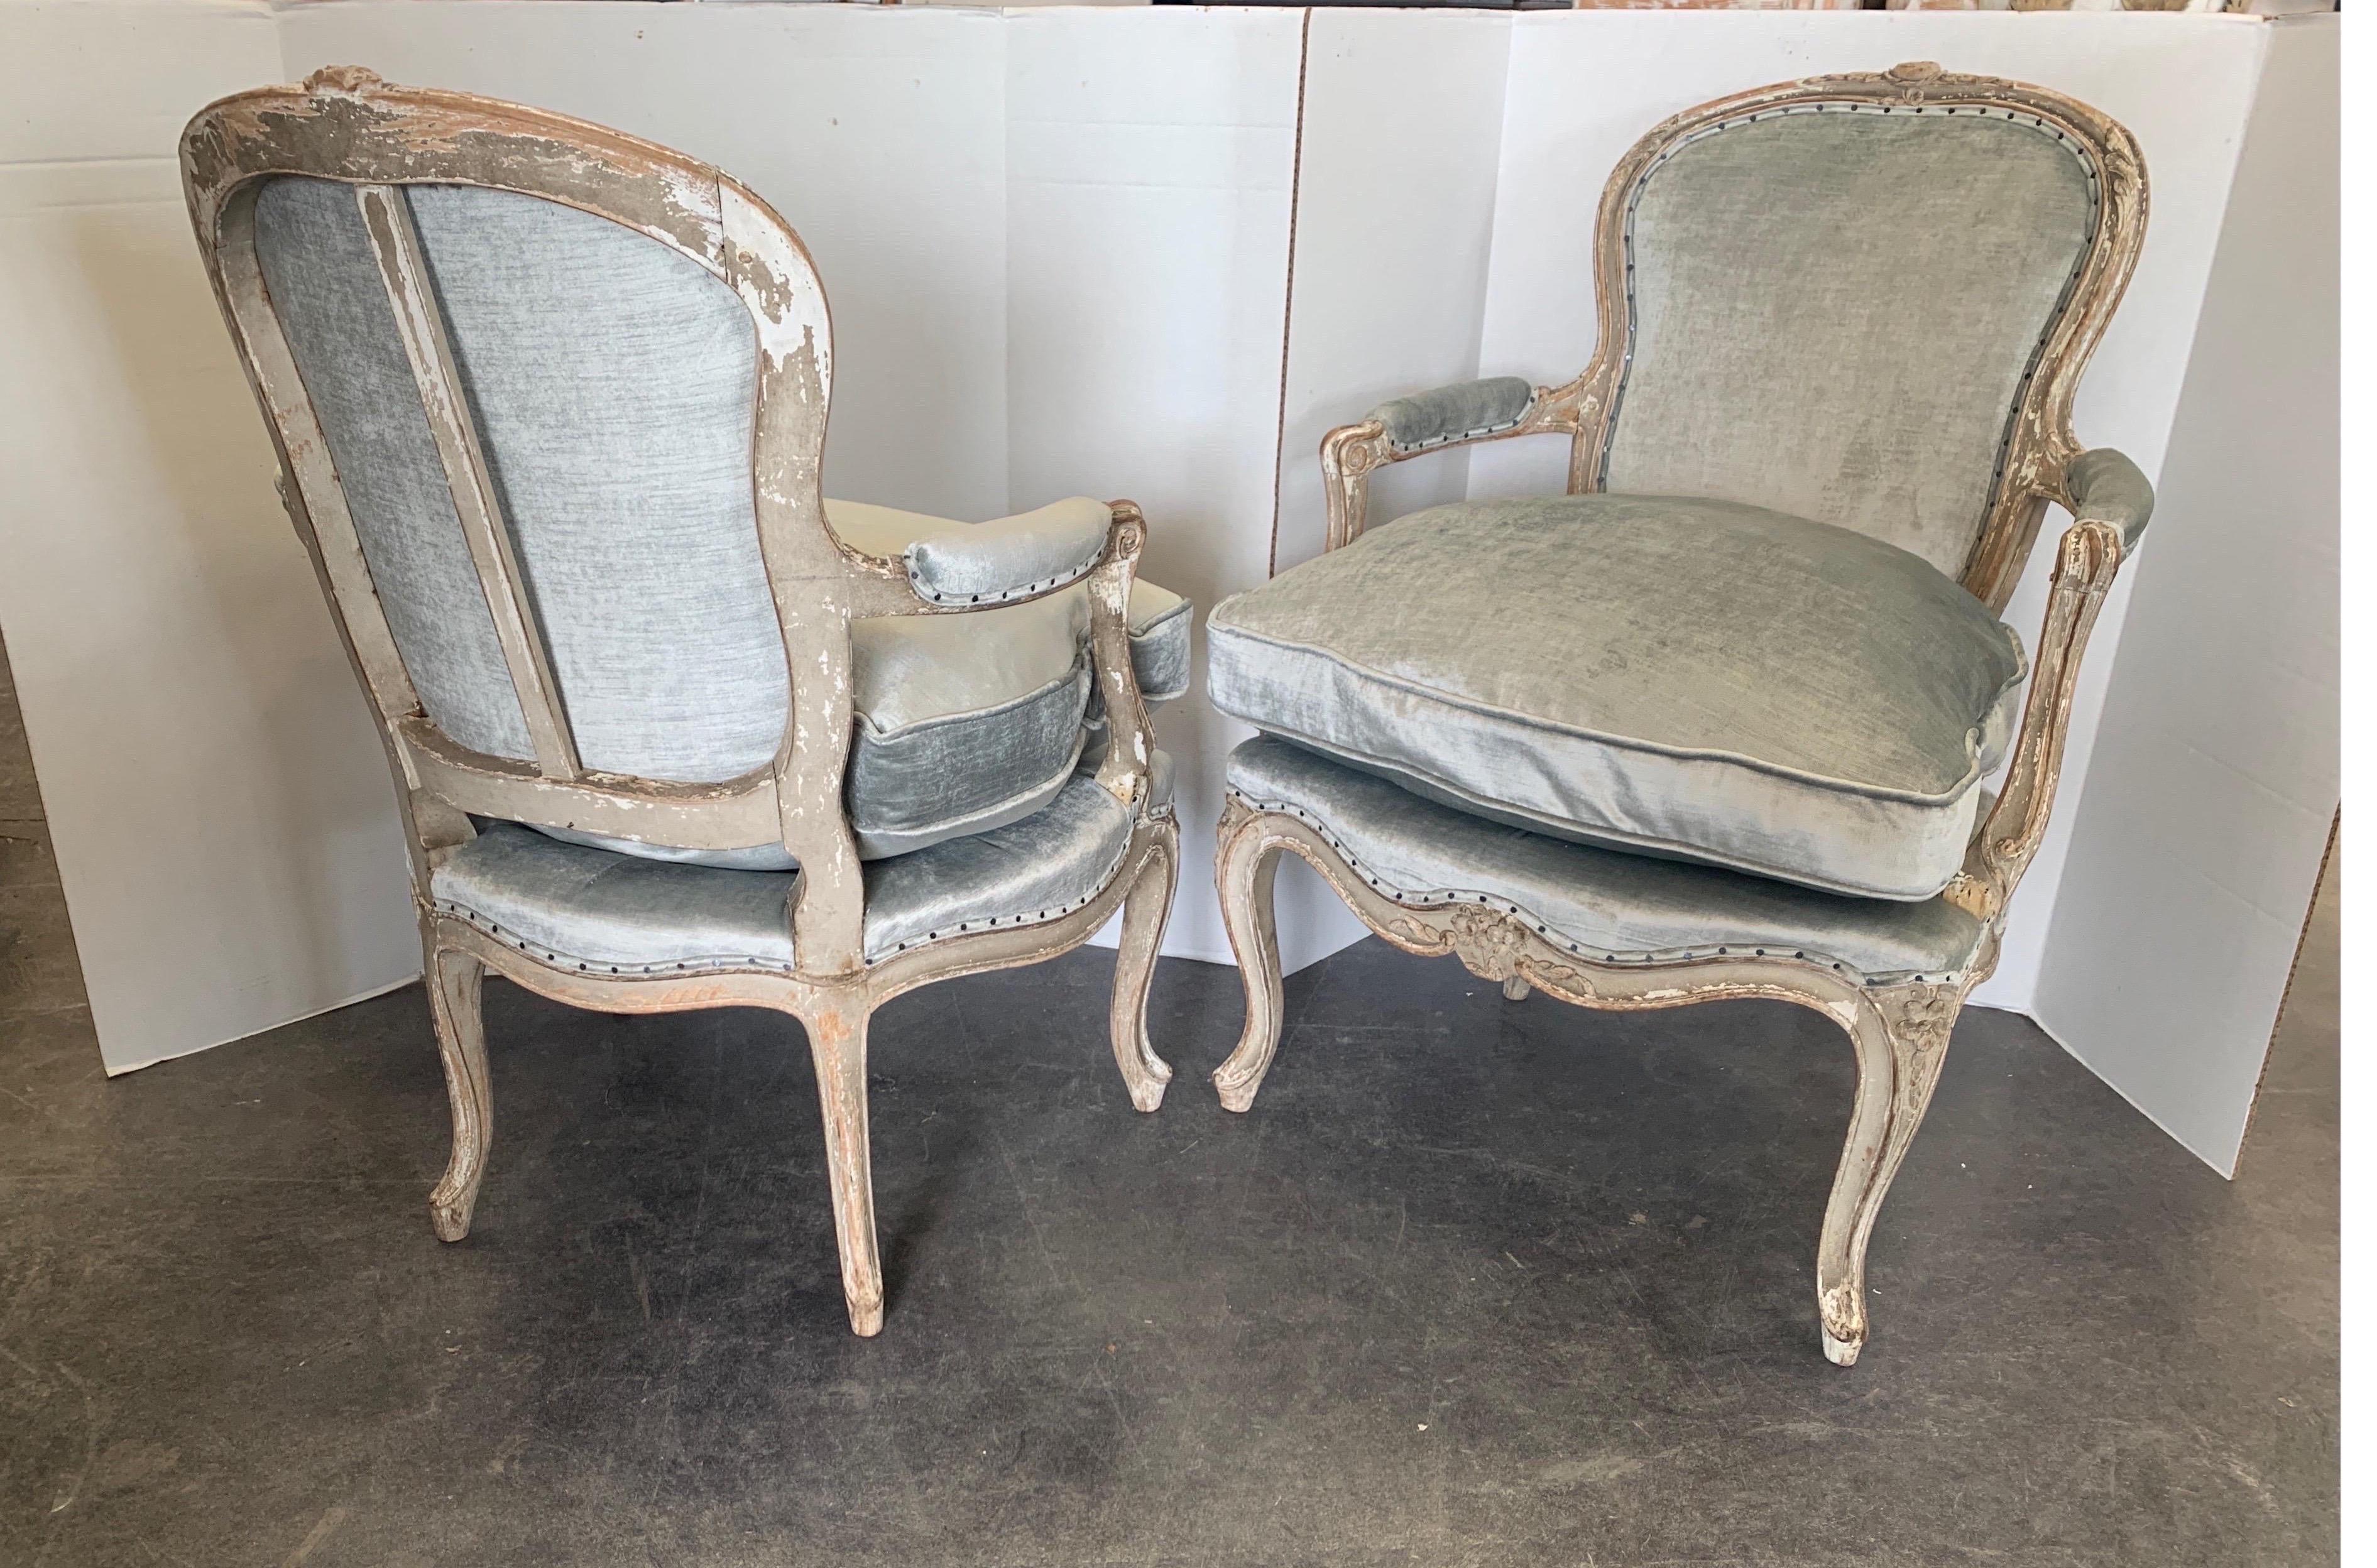 Incredible patina of original paint over blond wood carved chairs. These are after the famous Pierre Nogaret who resided in Paris in the 18th century. They are hand pegged and newly upholstered in nearly the same color as the original mohair was